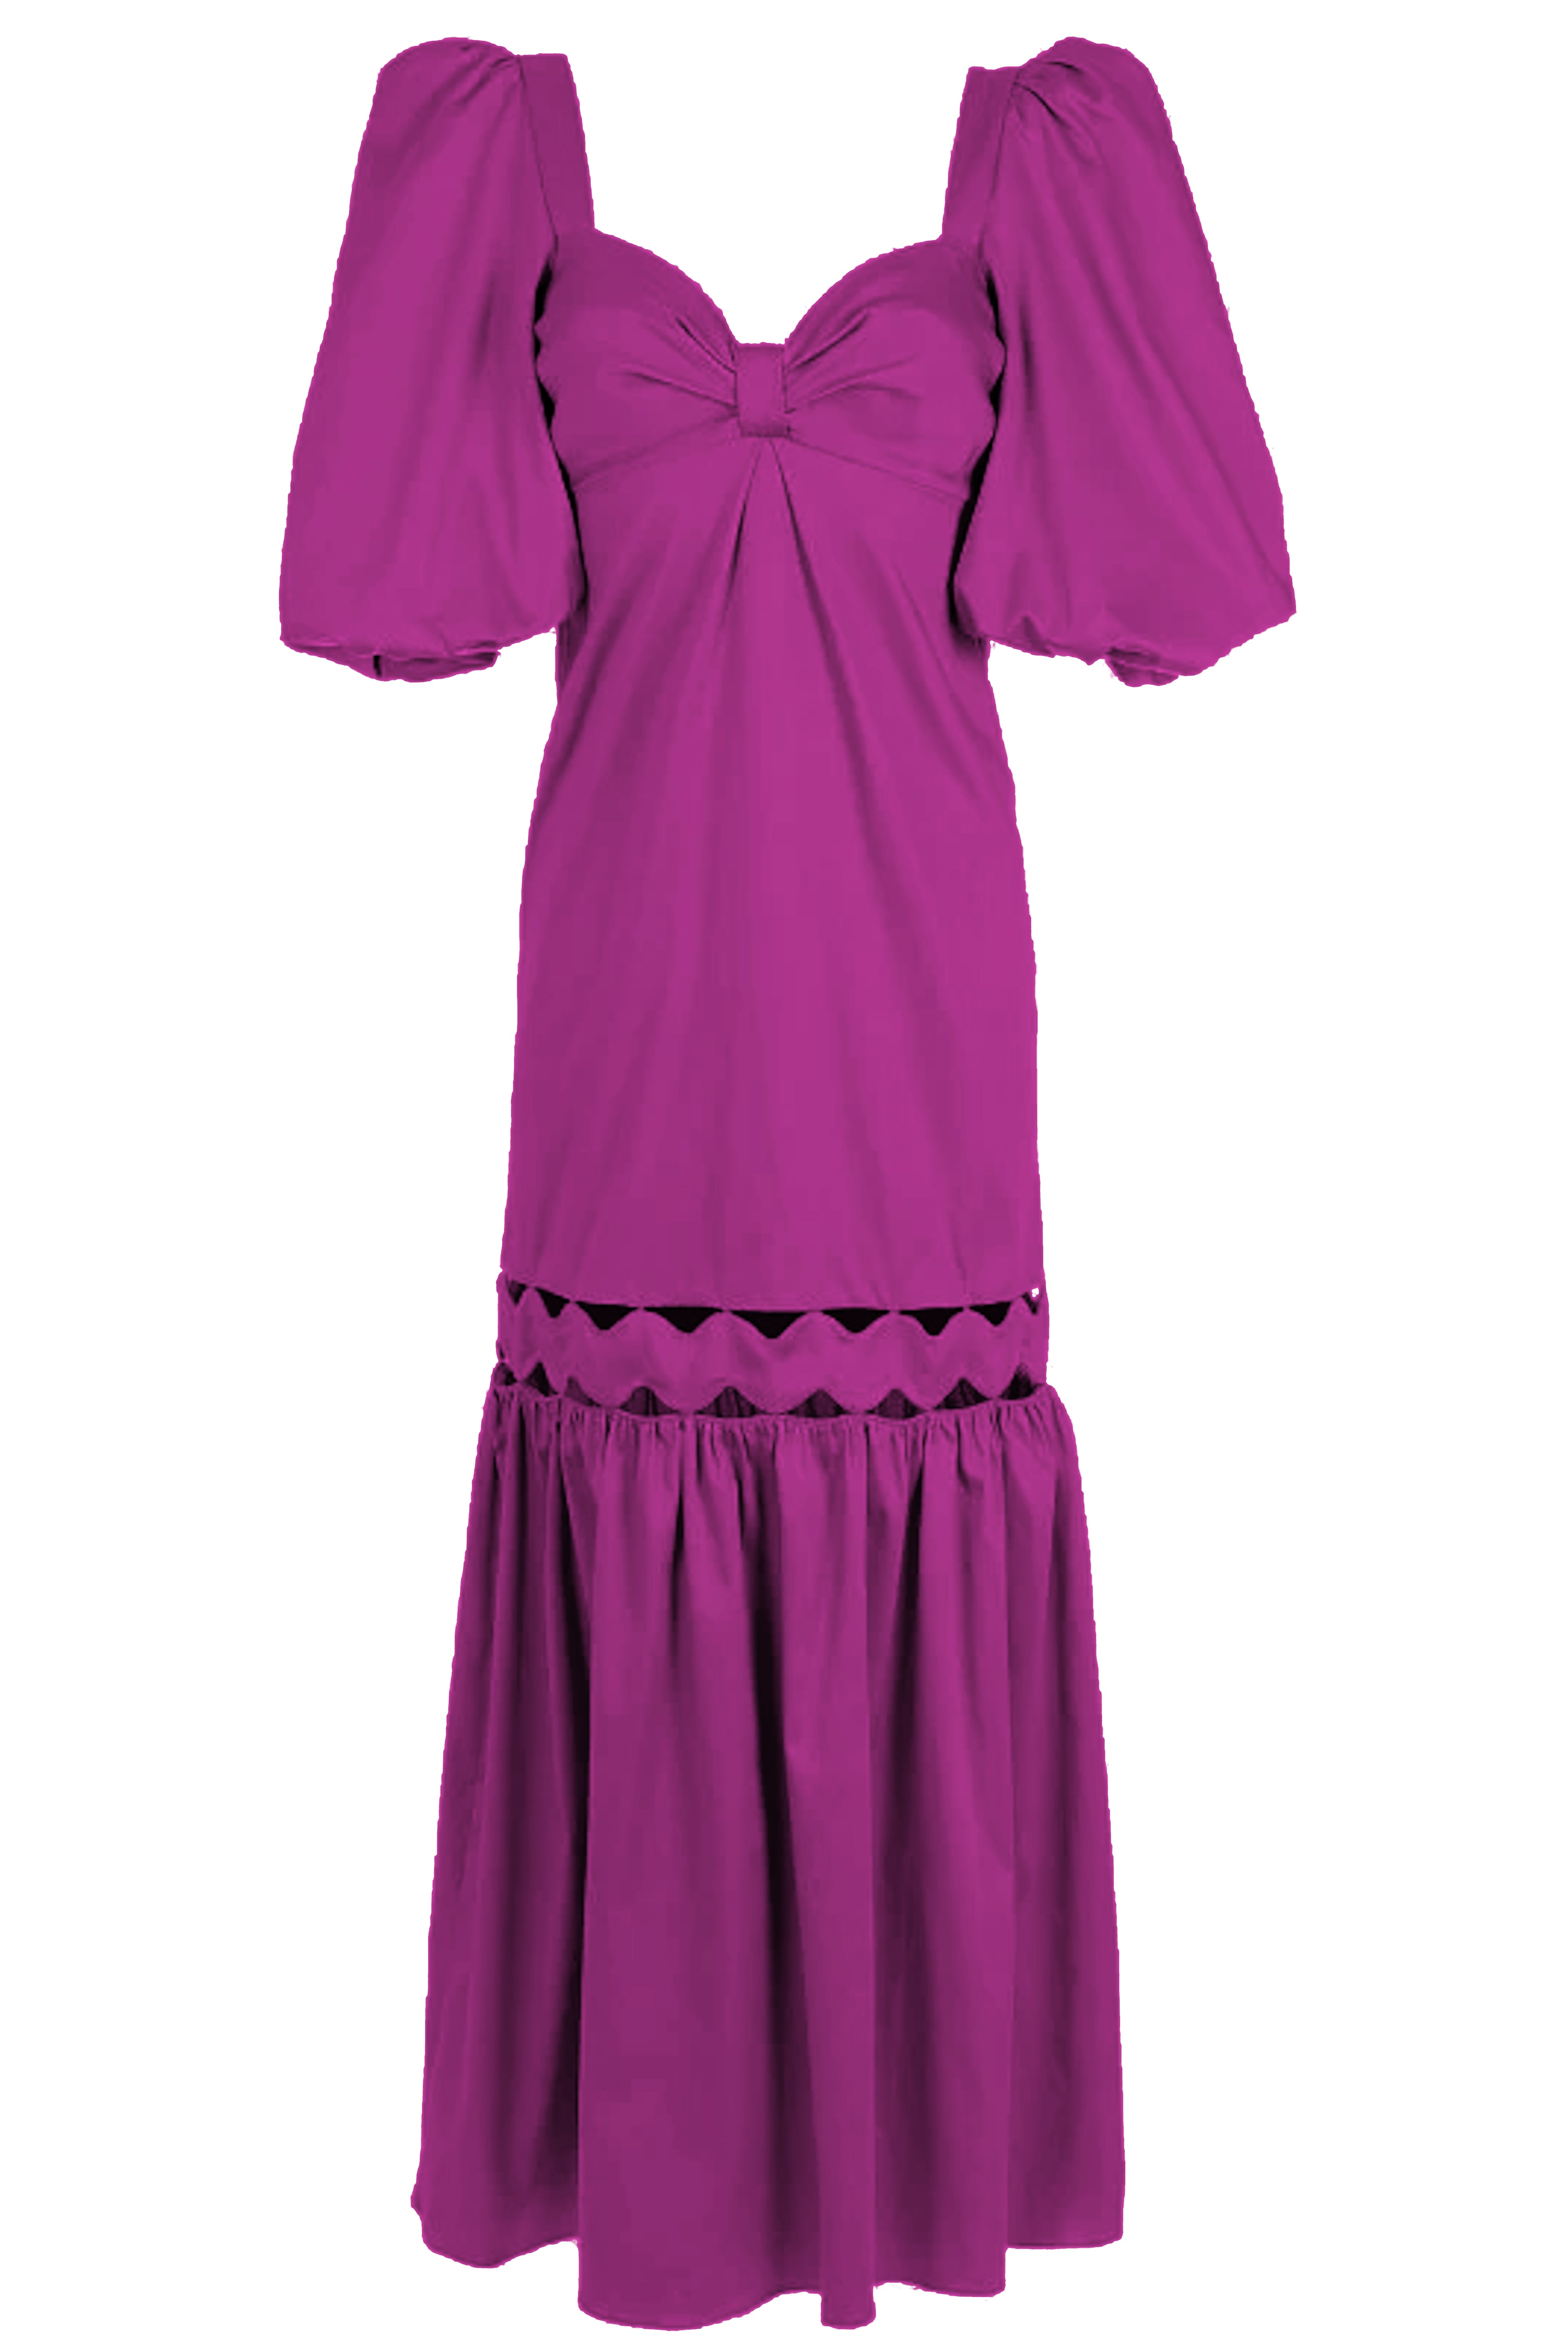 Moves Fuchsia Puff-Sleeved Long Dress Product